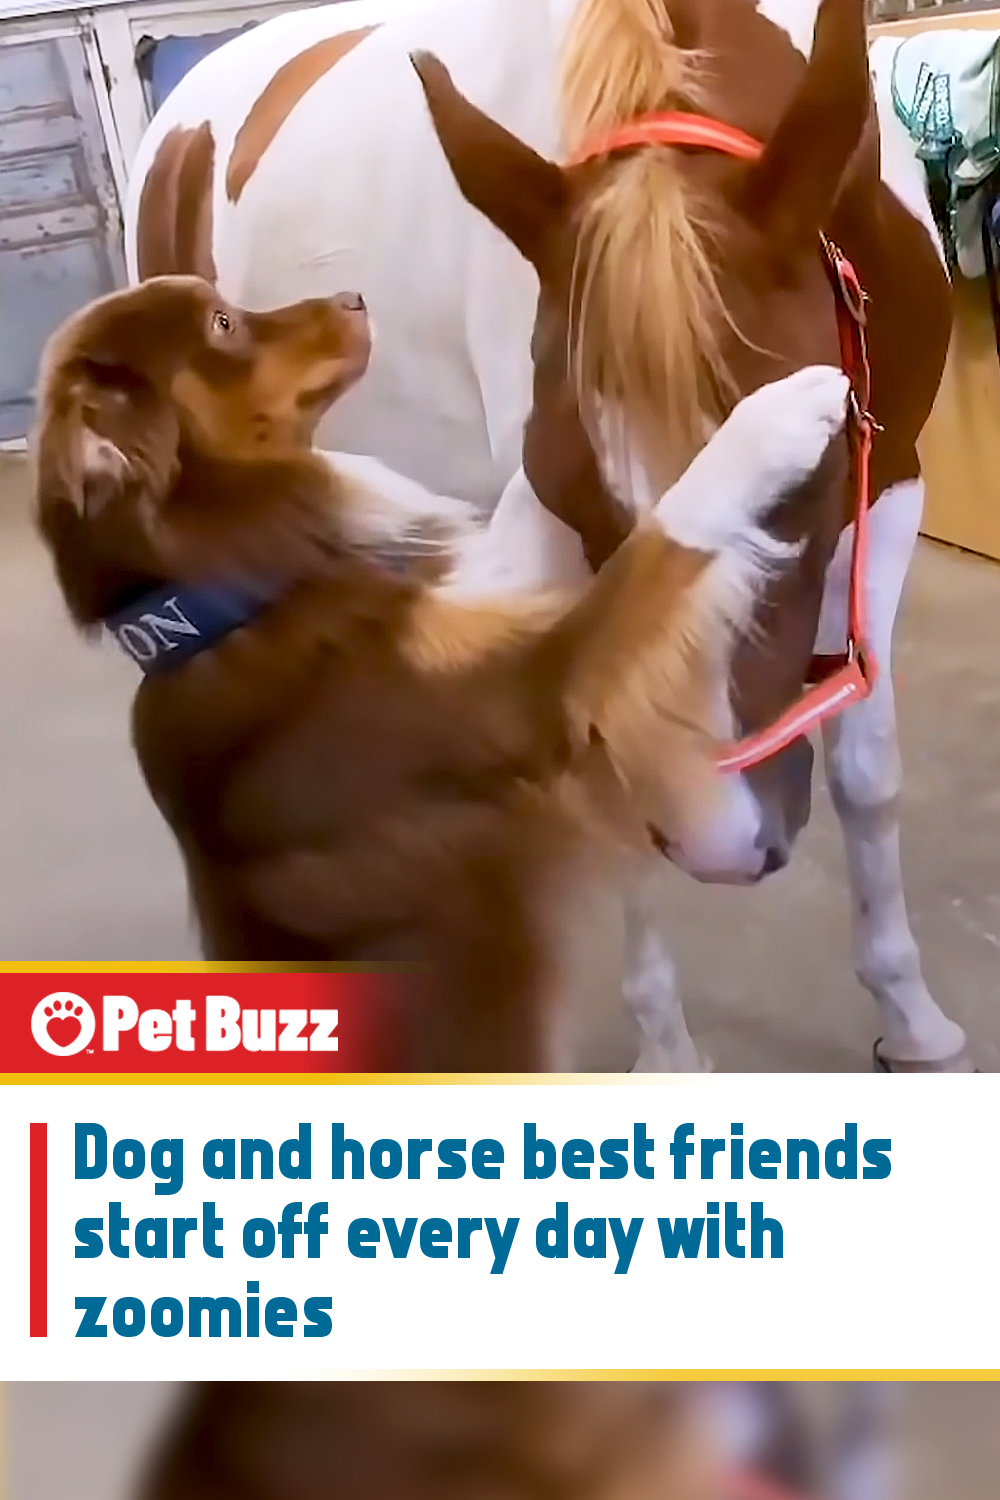 Dog and horse best friends start off every day with zoomies